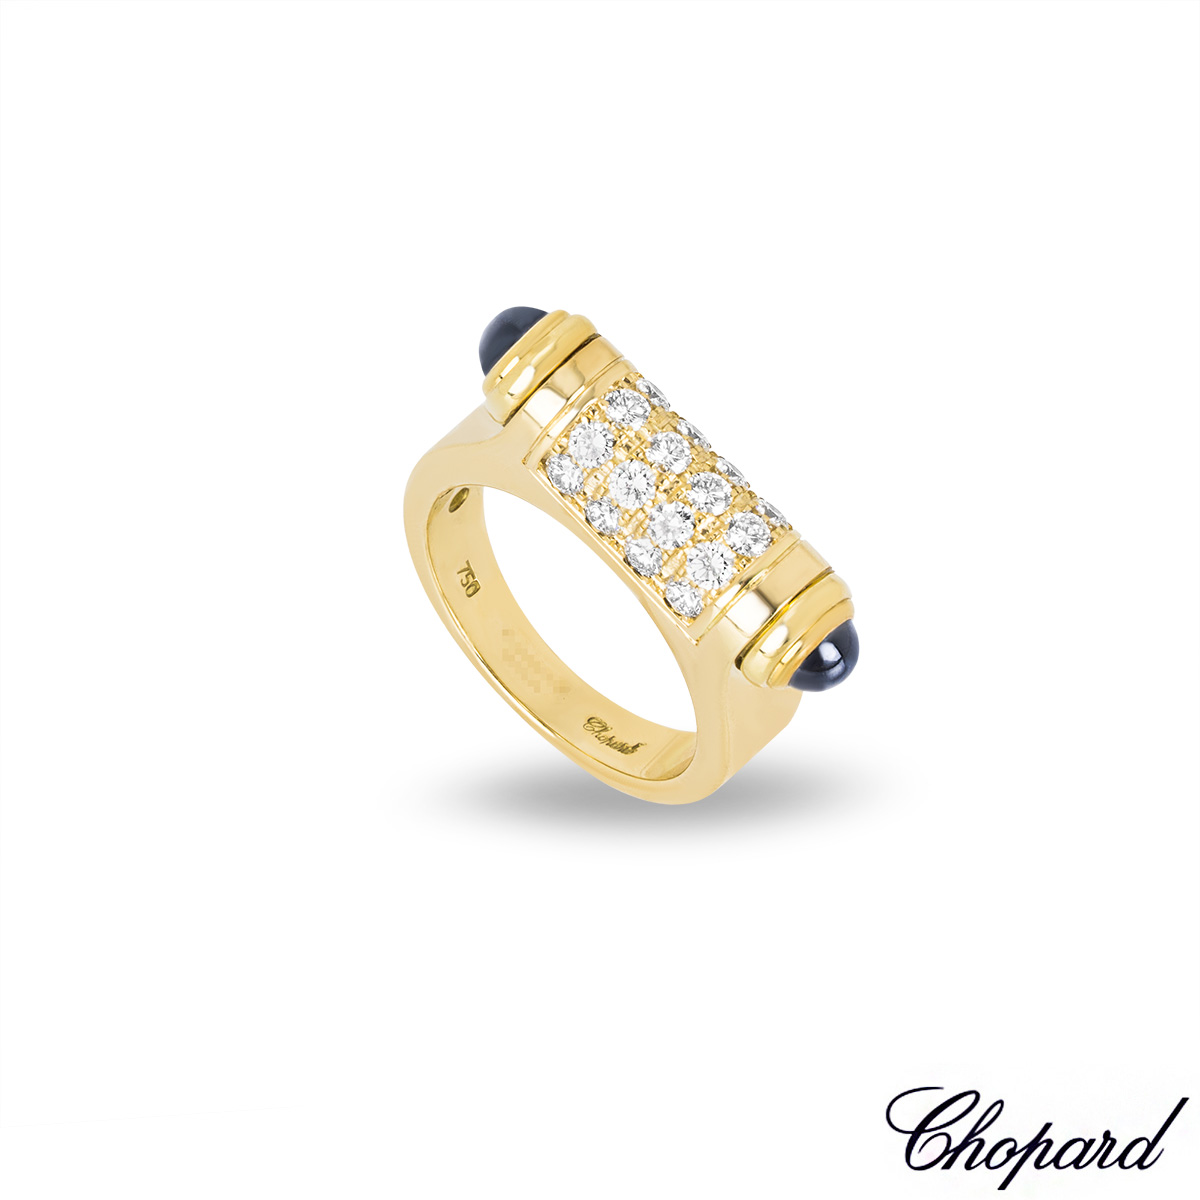 Chopard Limted Edition Diamond Set Imperiale Ring 823255-0111